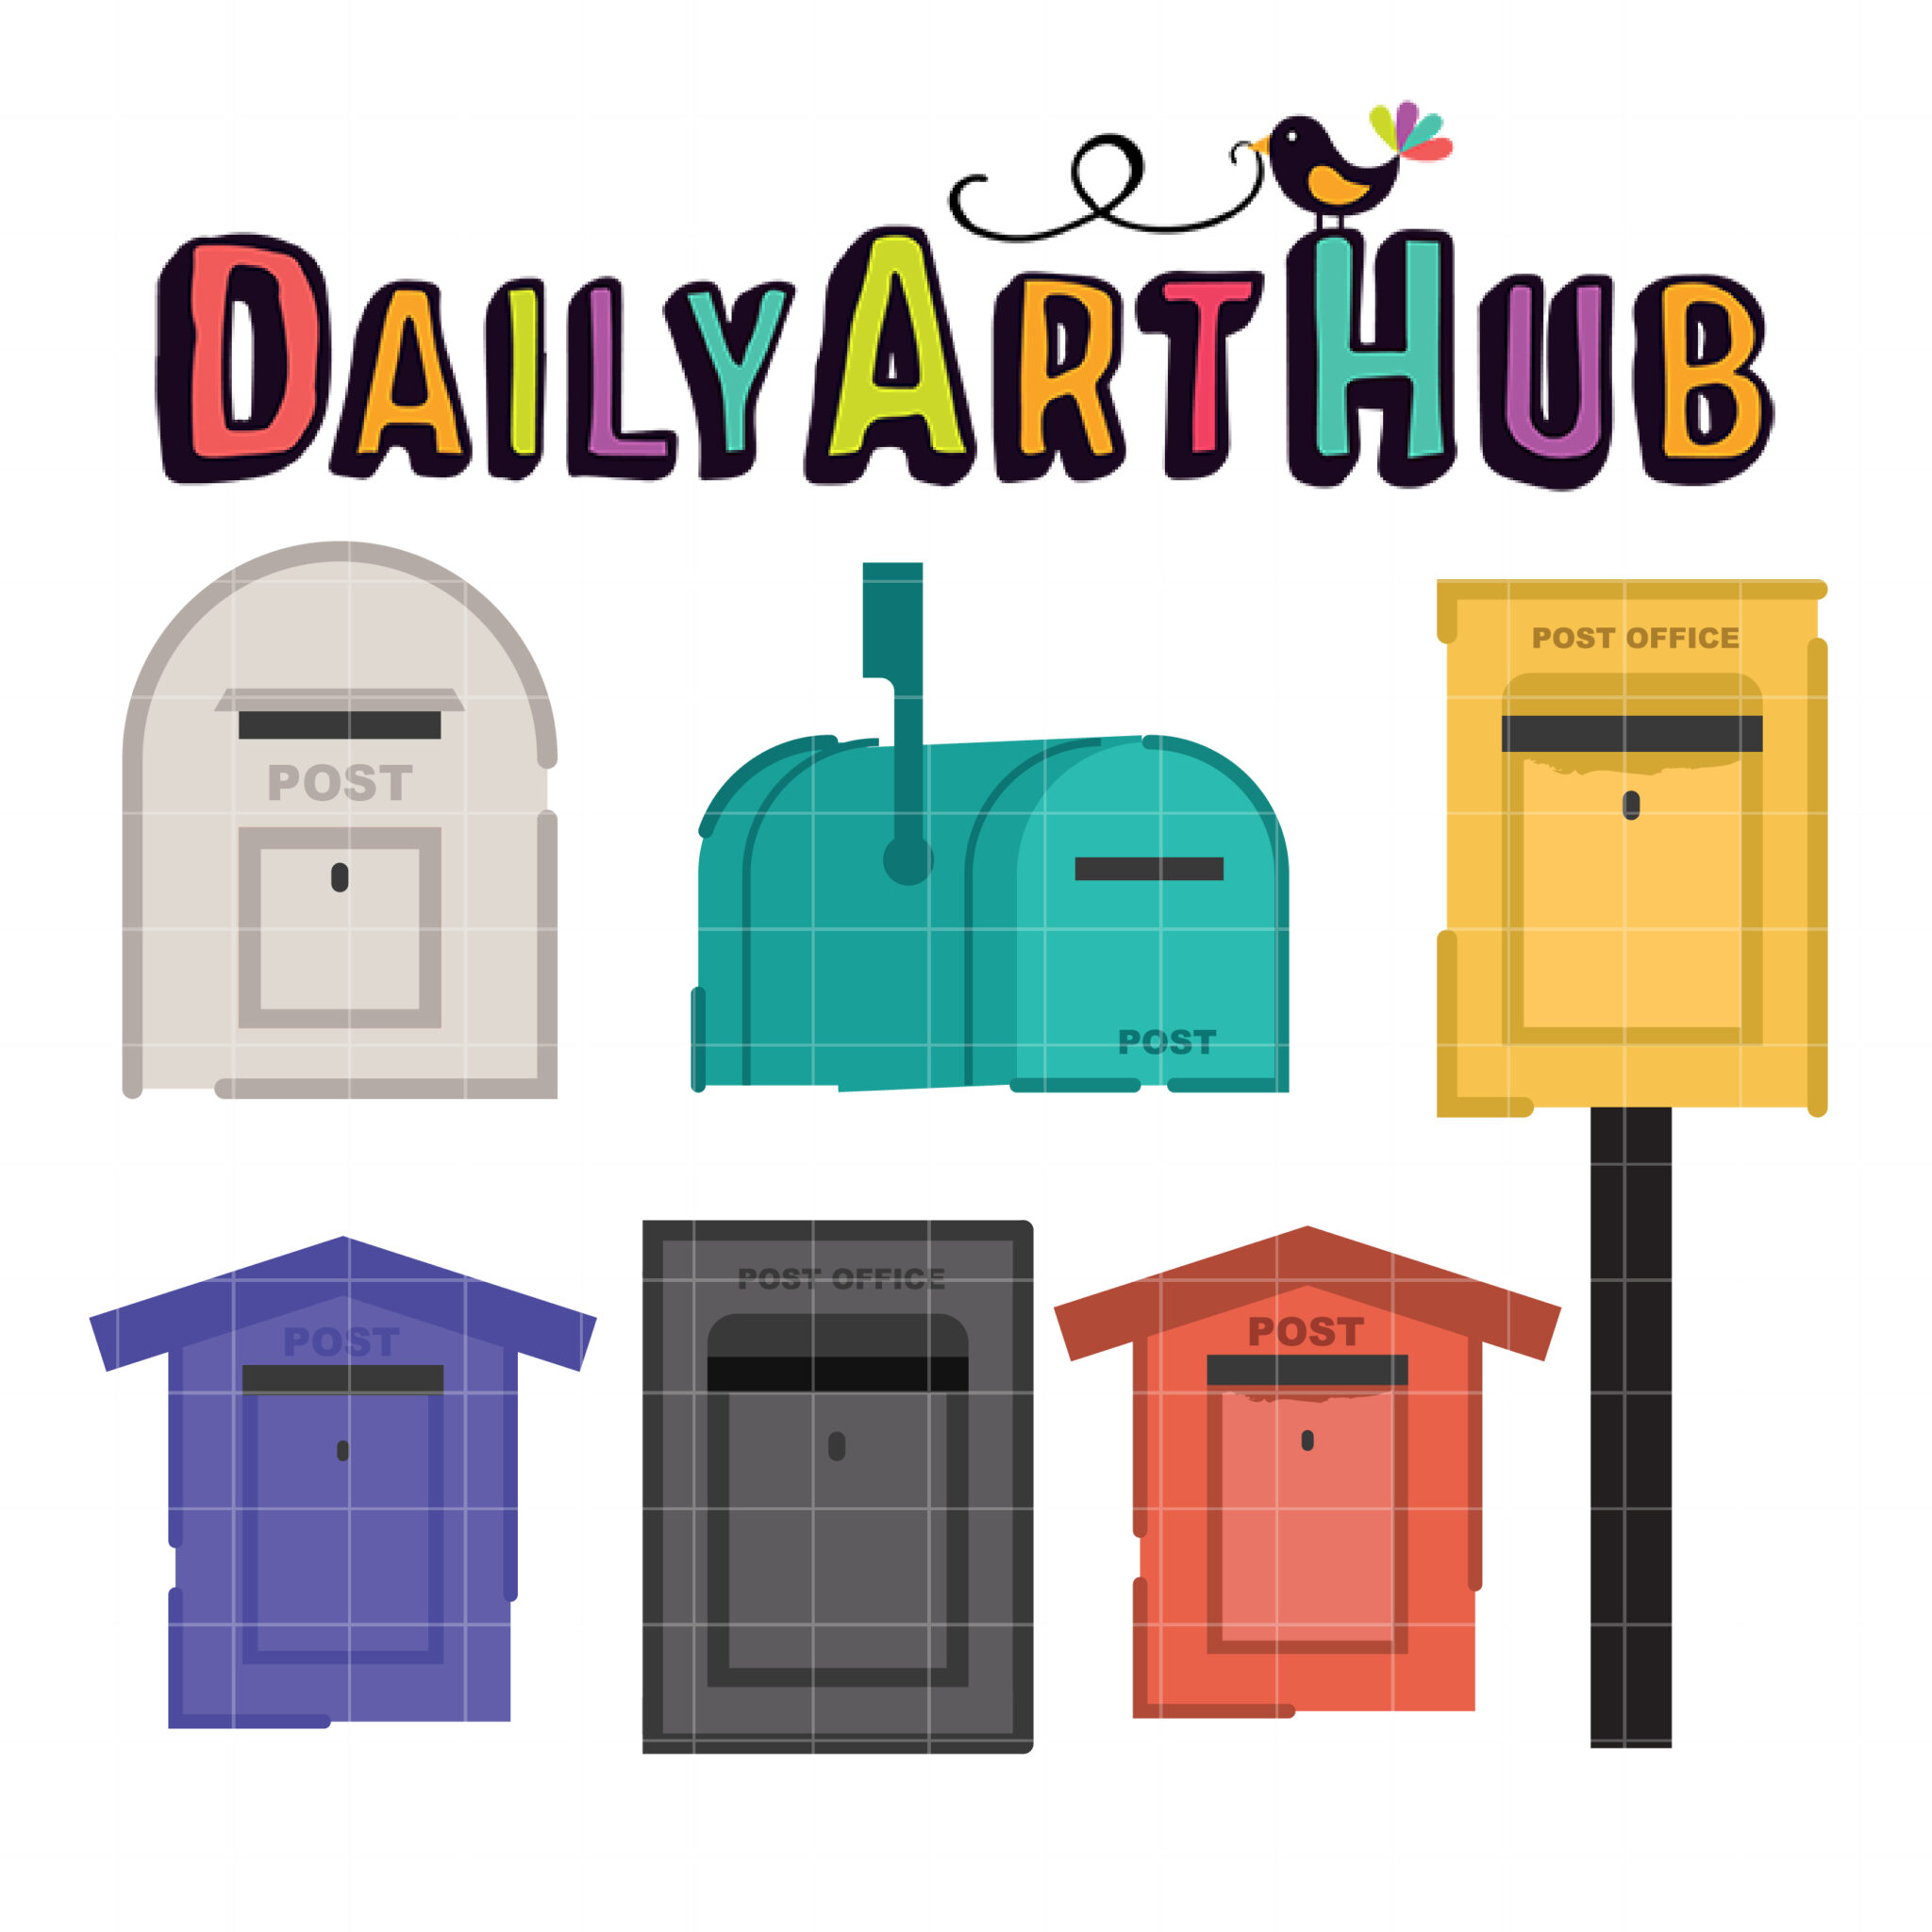 https://www.dailyarthub.com/wp-content/uploads/2020/01/Different-Post-Box-Collection-scaled.jpg